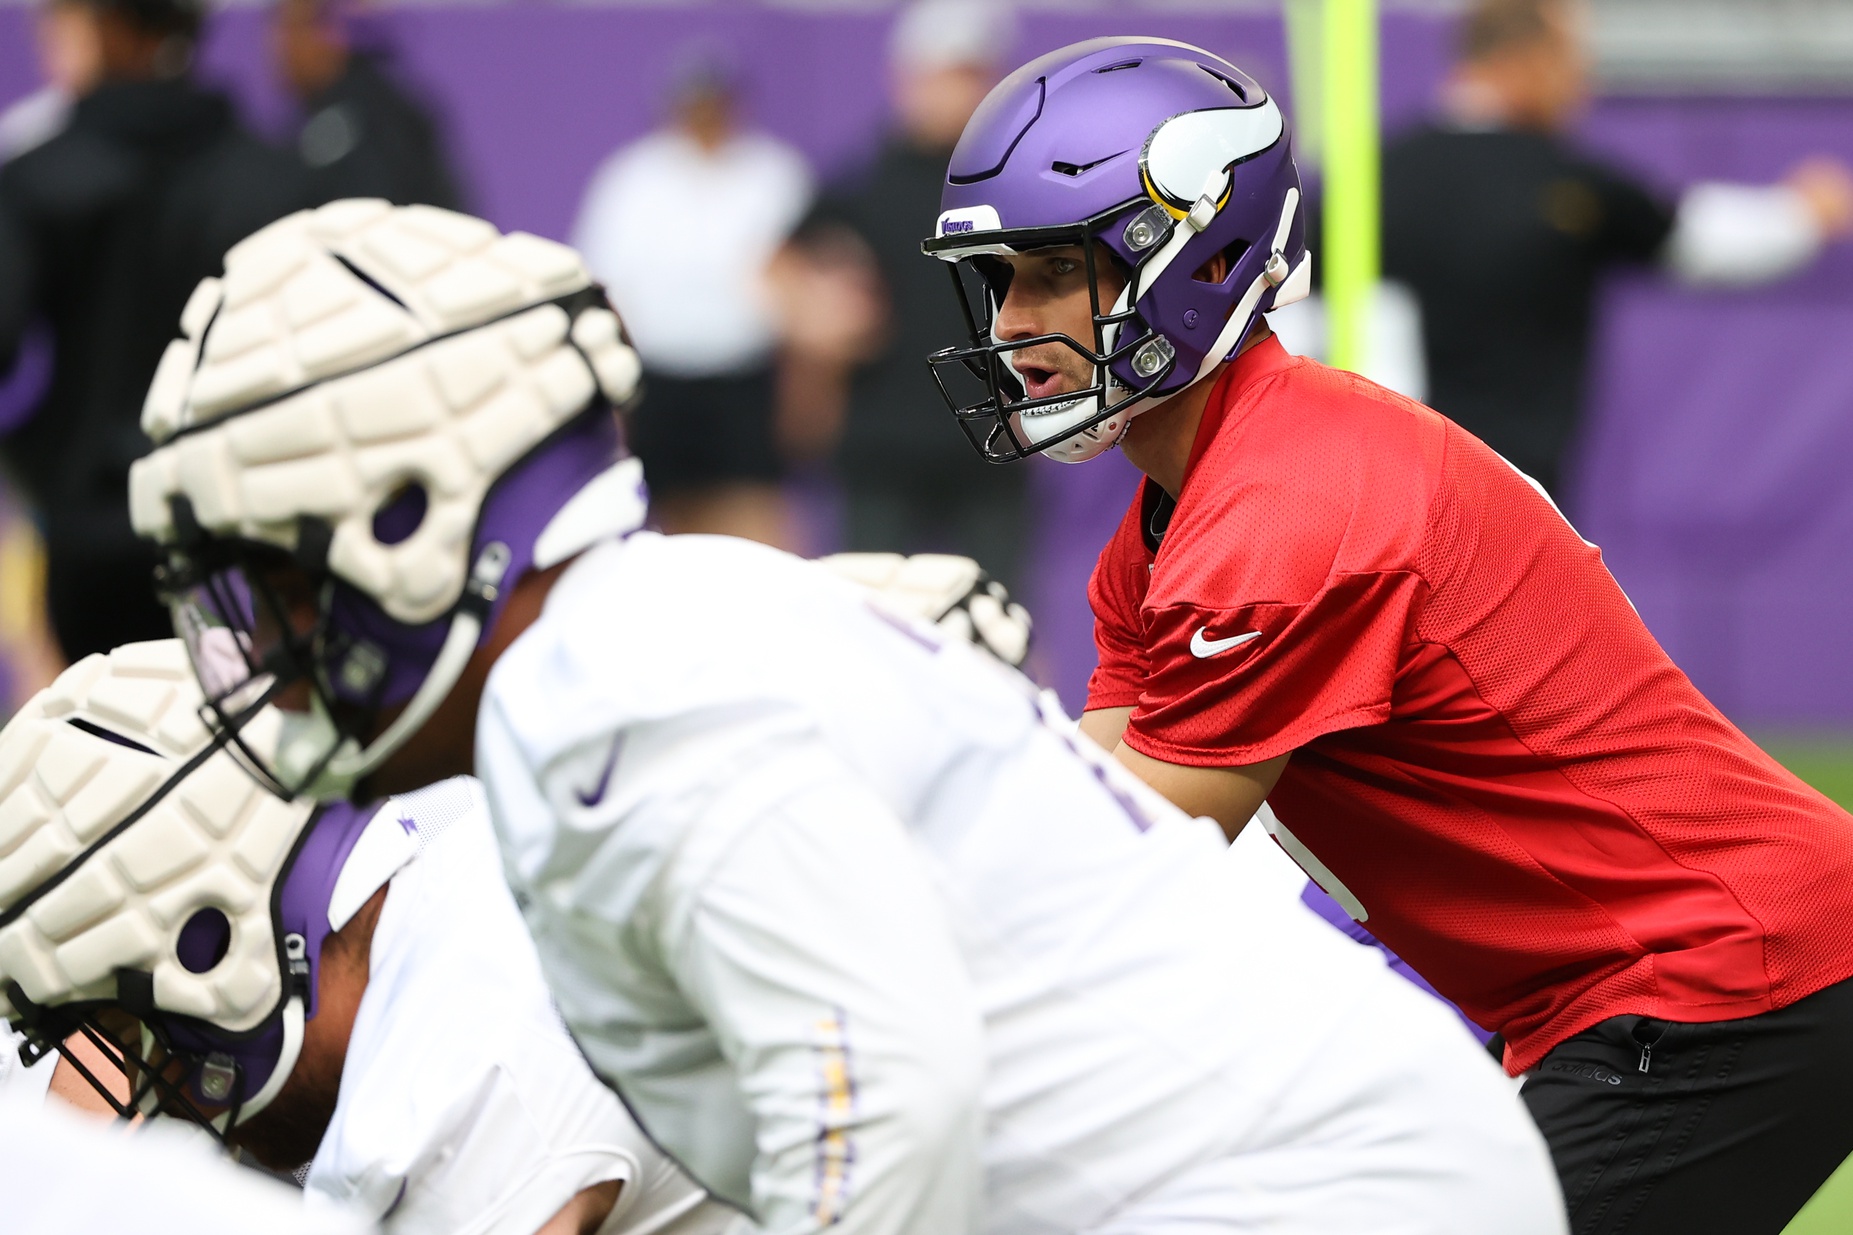 Minnesota Vikings Training Camp: Practice Report, News, and More From Day 1